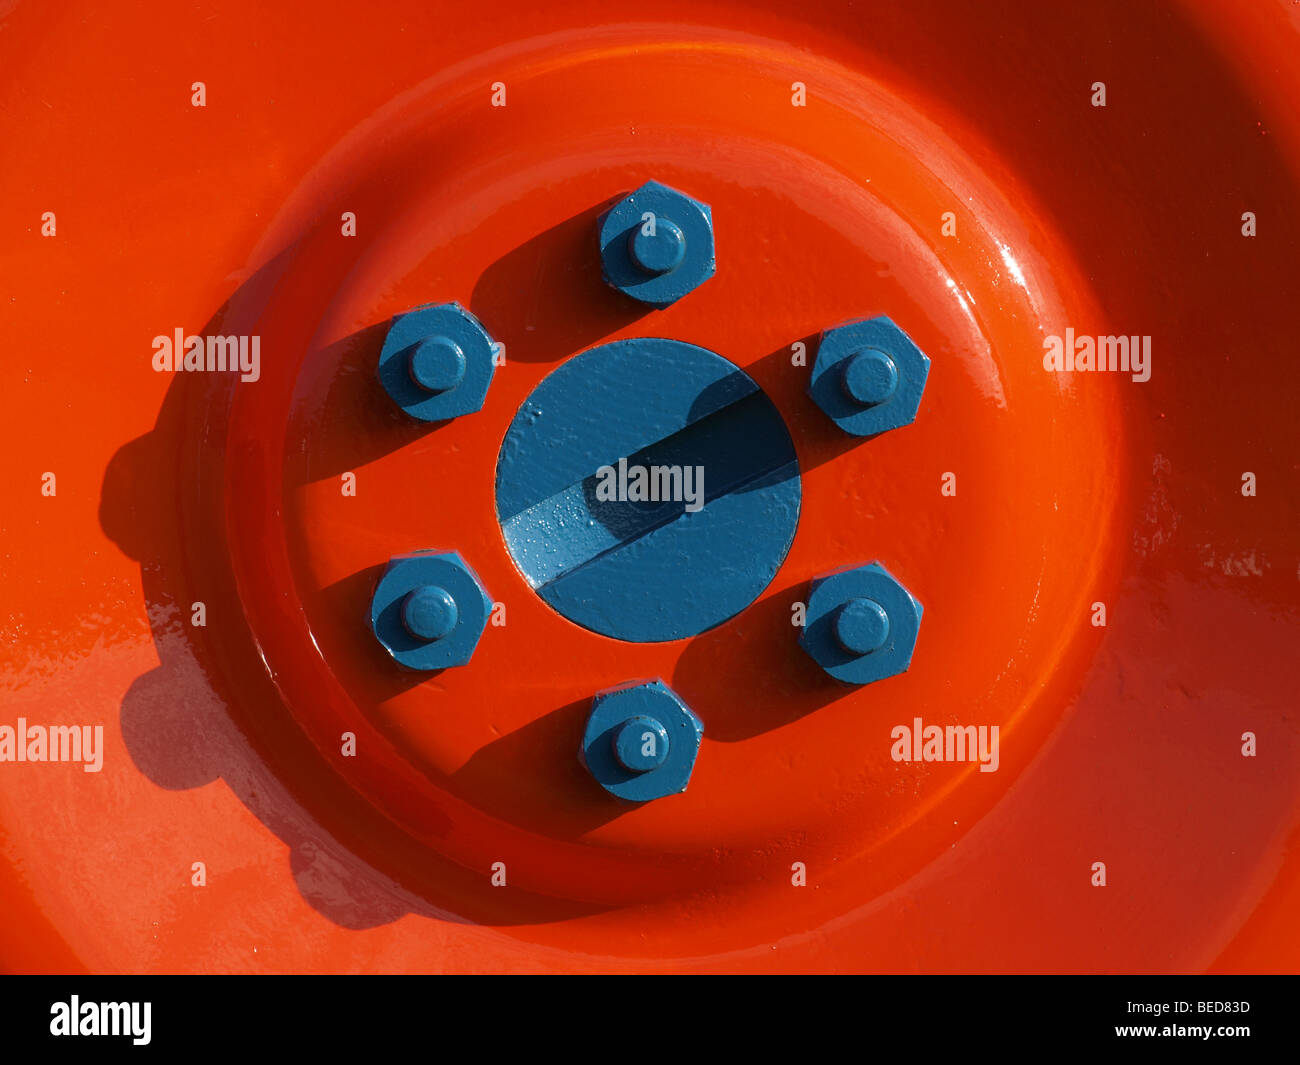 bright tractor wheel hub in oblique sunshine casts shadows from 6 wheel nuts Stock Photo